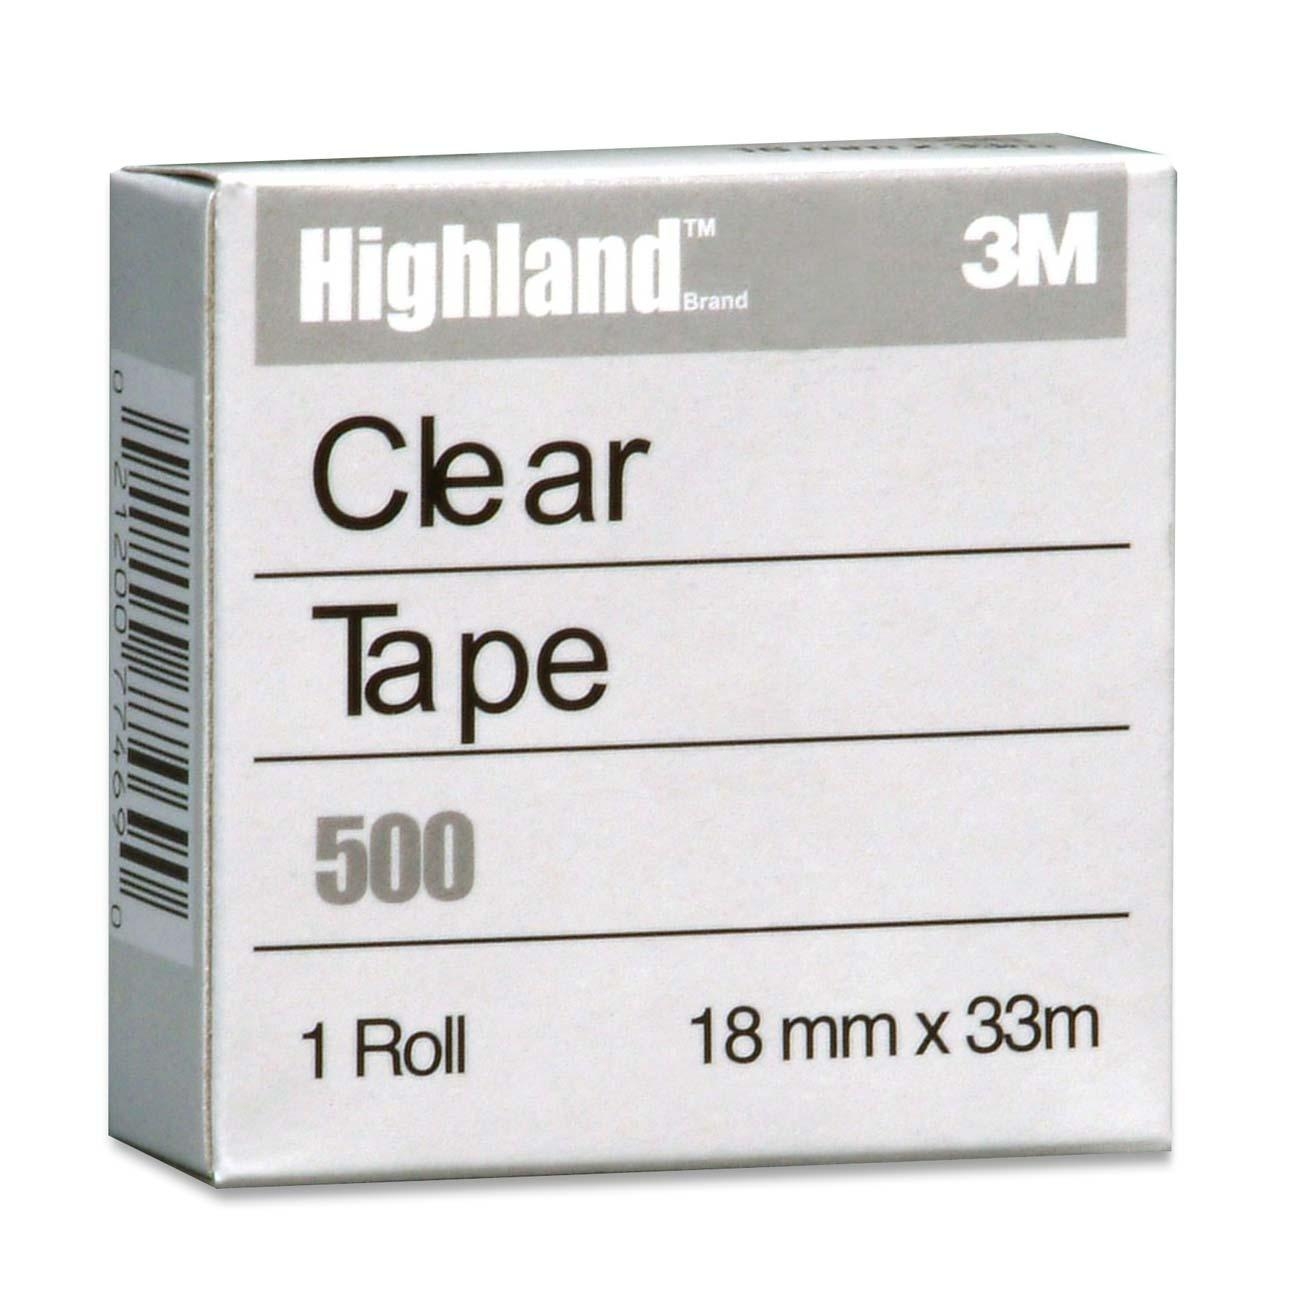 3M Highland Tape Cellulose Refill - 0.5"x33m - Each500-12BXD